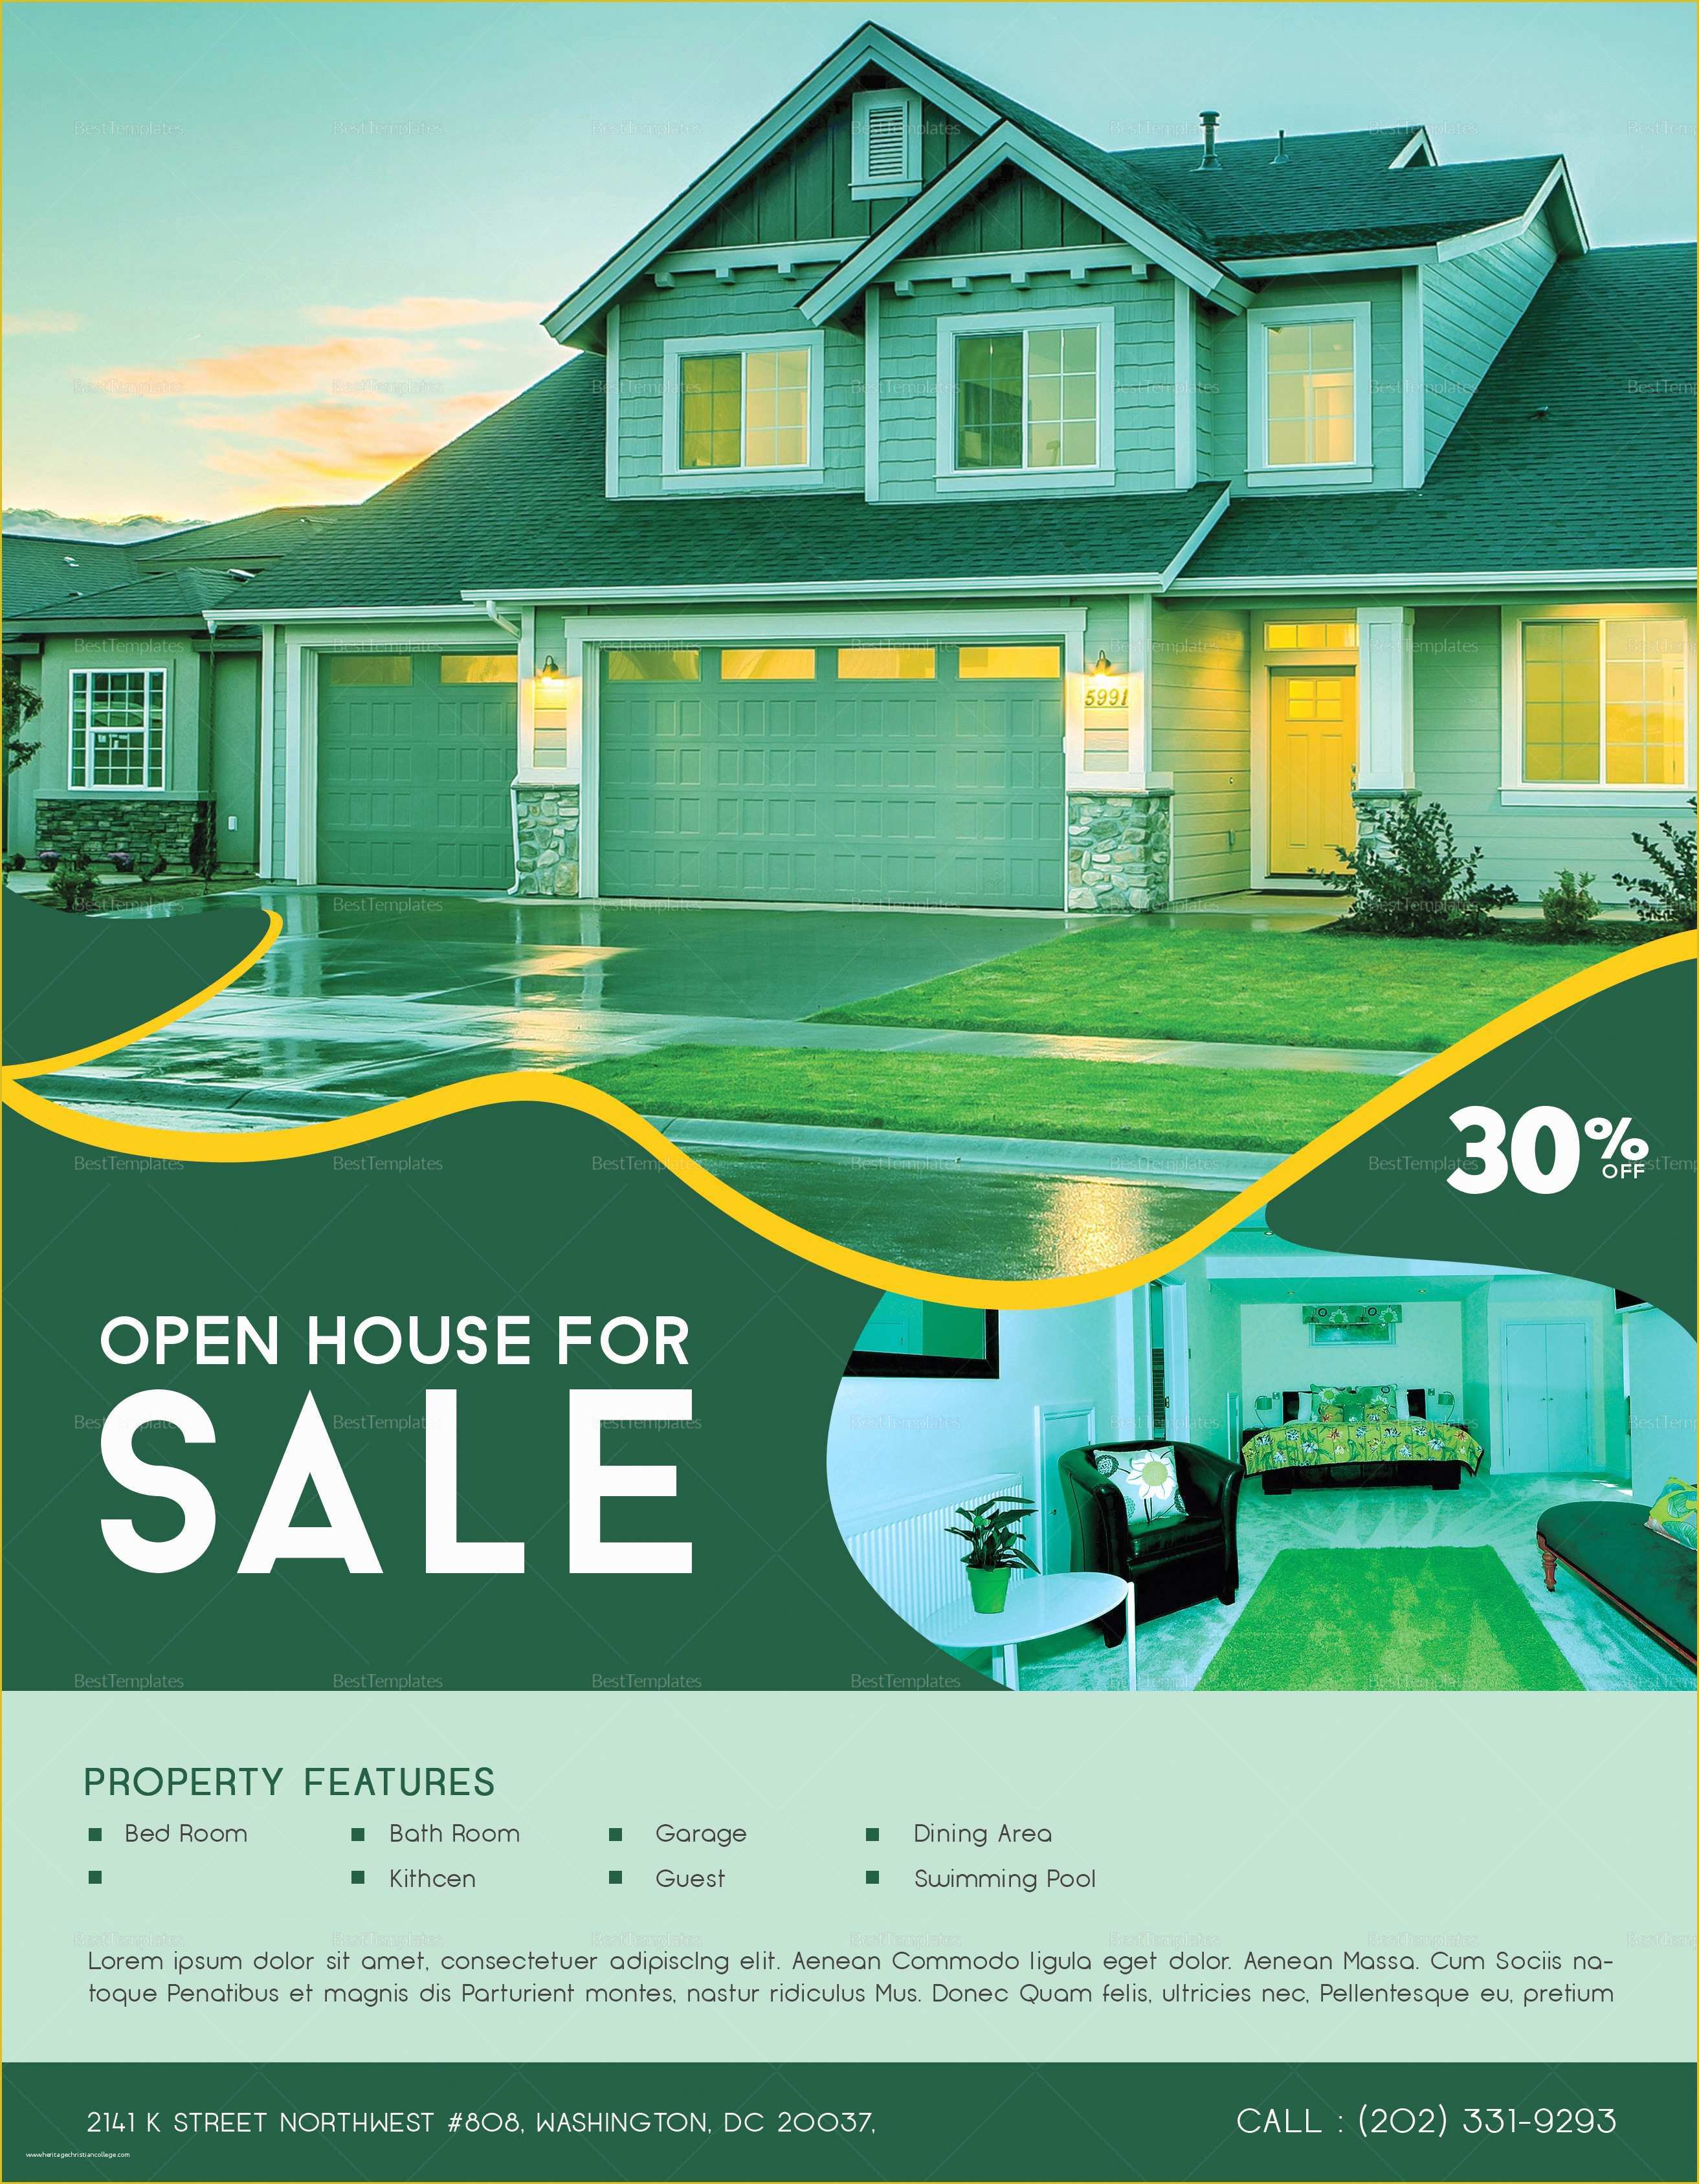 Open House Flyer Template Free Publisher Of Open House Sale Flyer